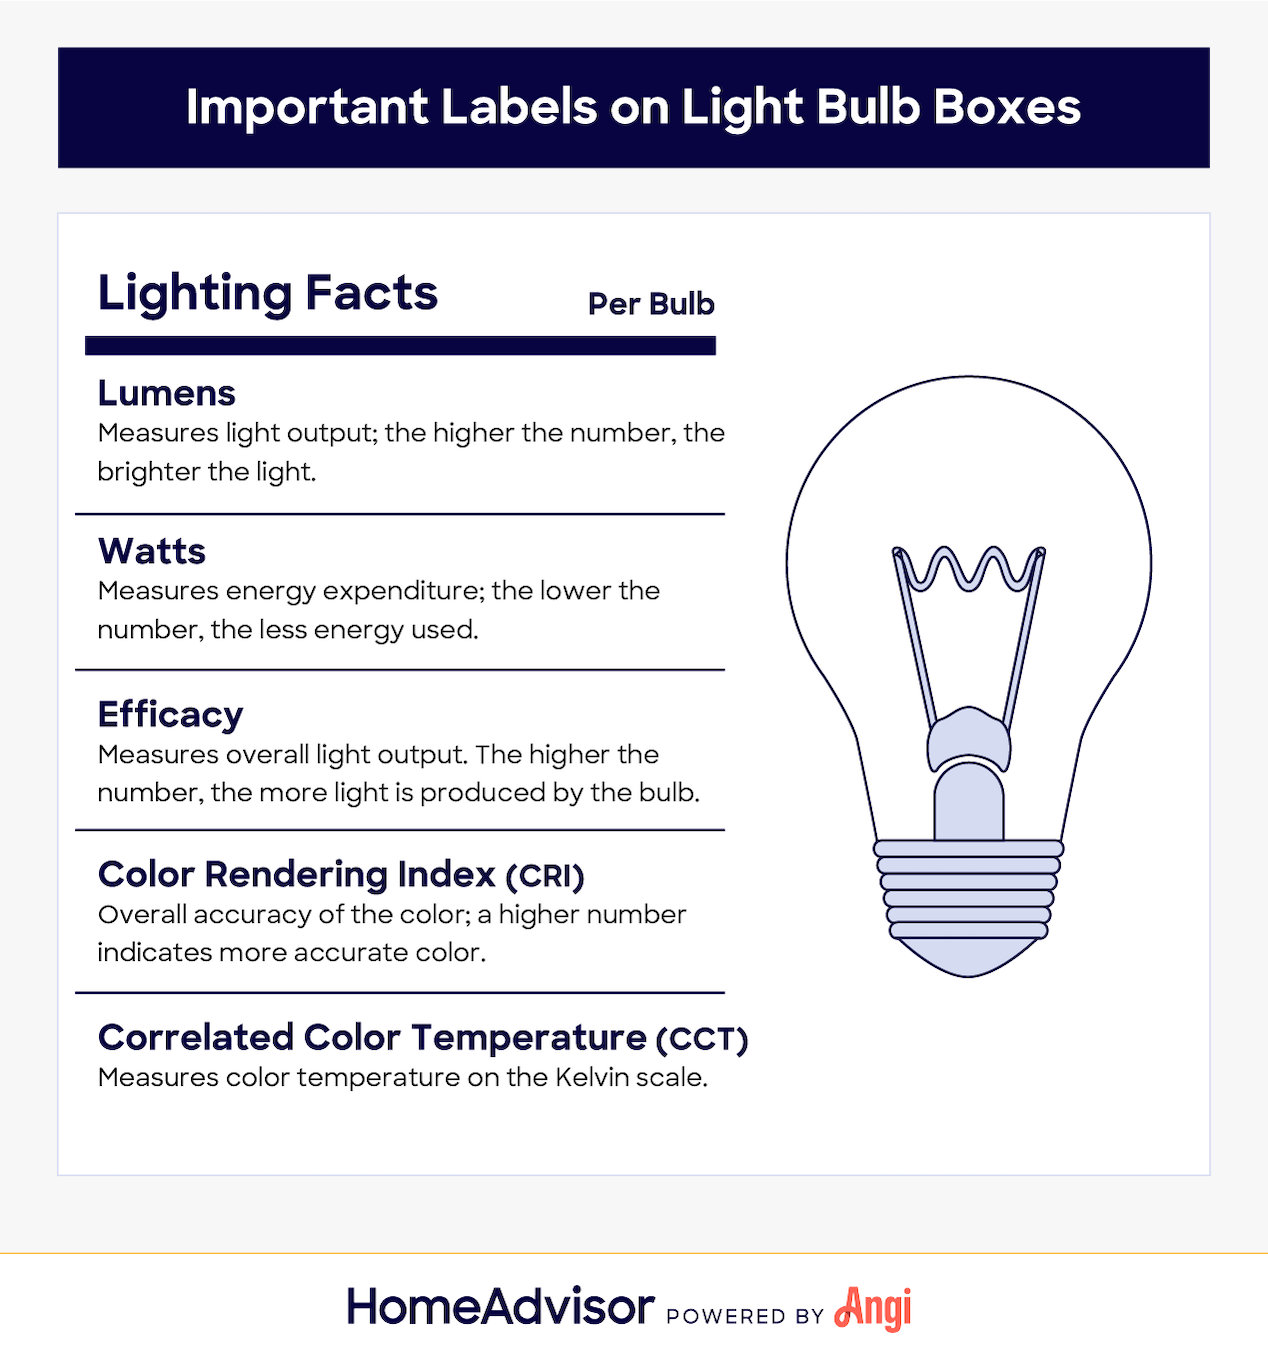 Important Labels on Light Bulb Boxes